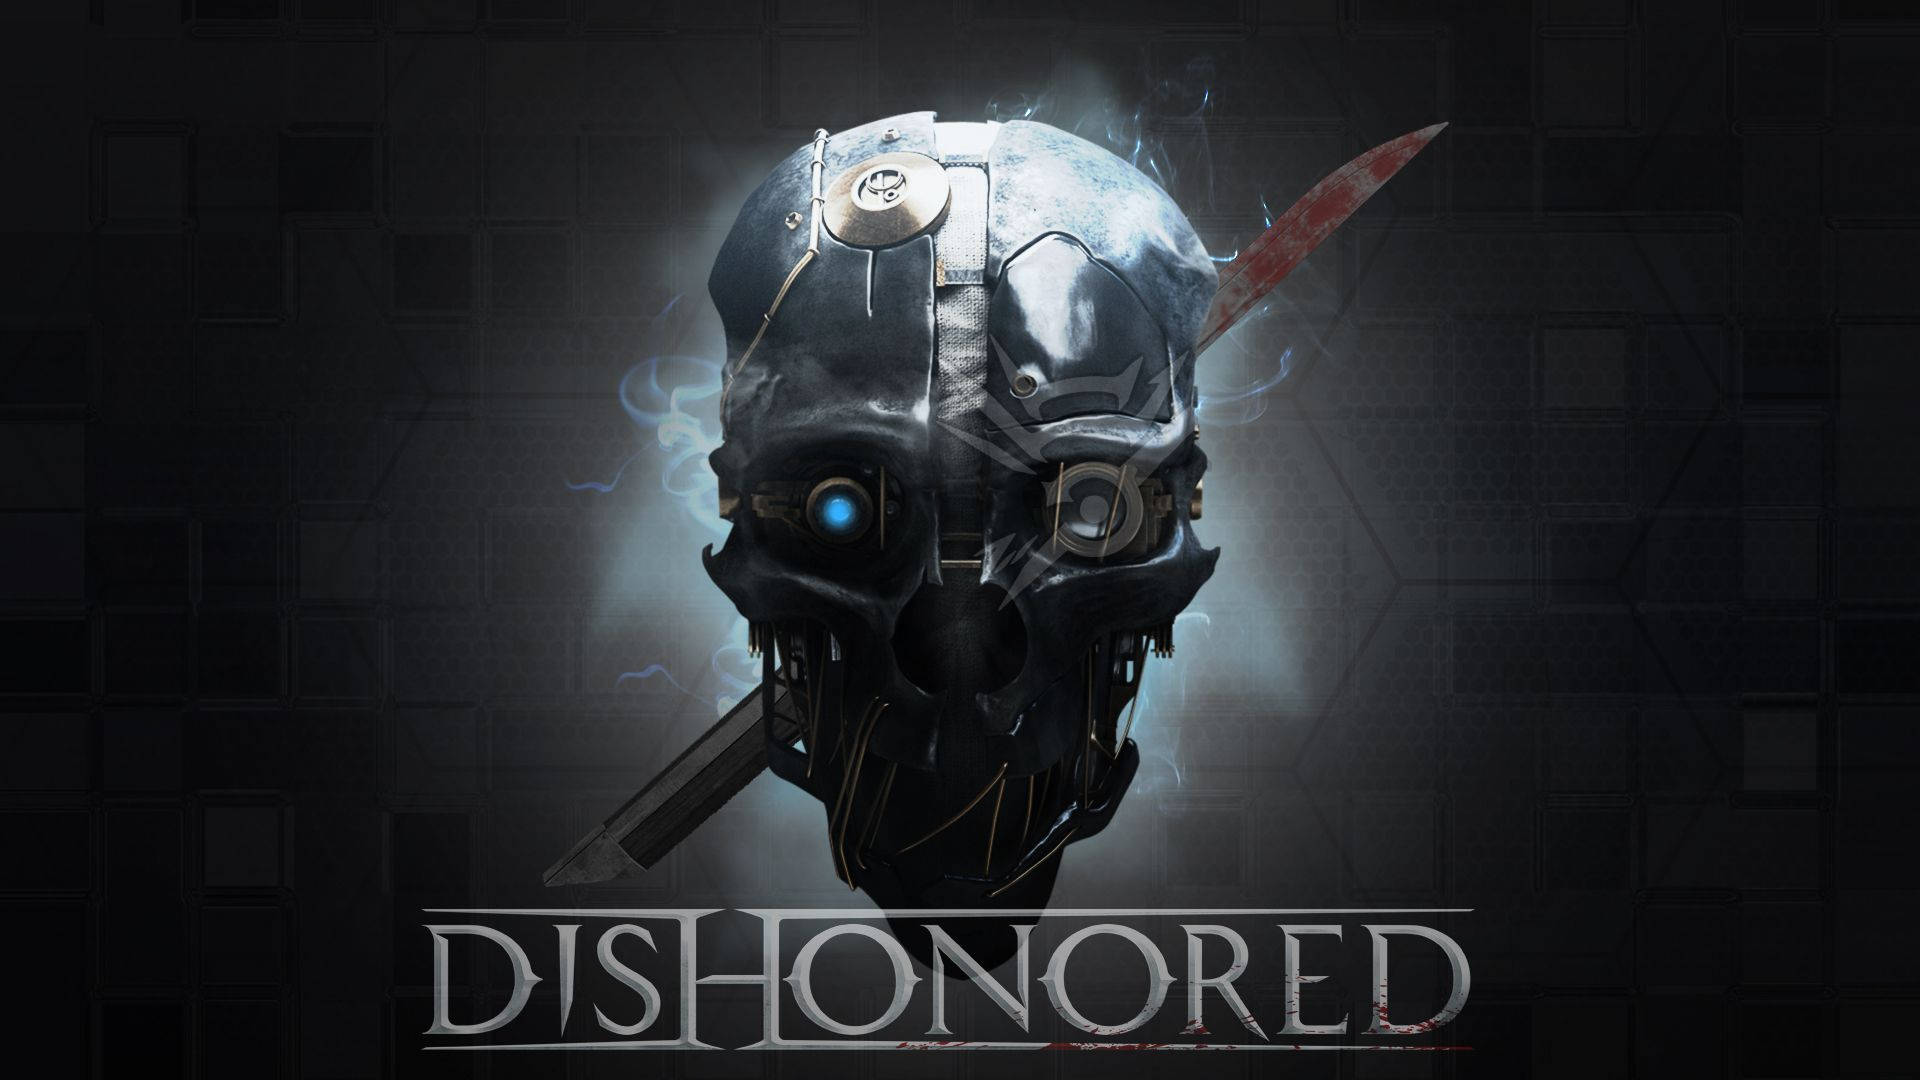 Top 999+ Dishonored Wallpaper Full HD, 4K✅Free to Use